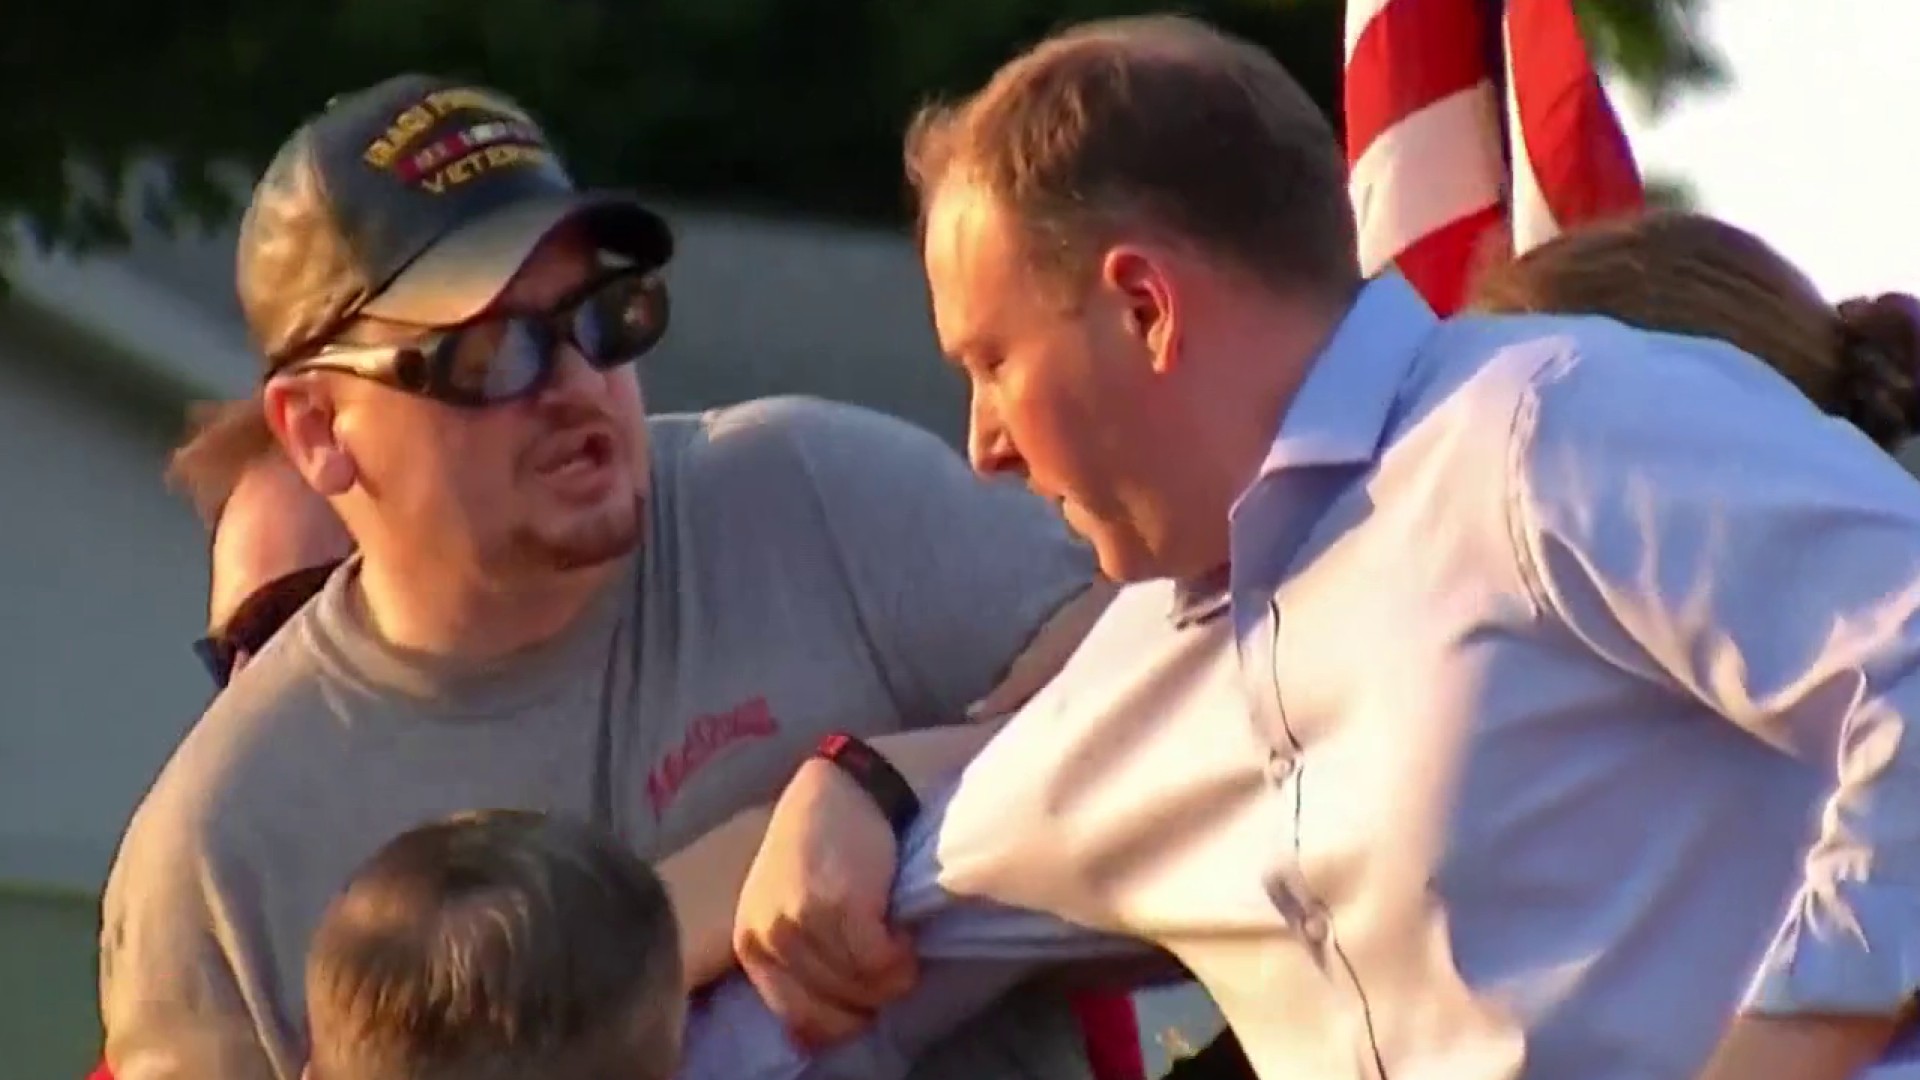 . Rep. Lee Zeldin attacked on stage at New York campaign event